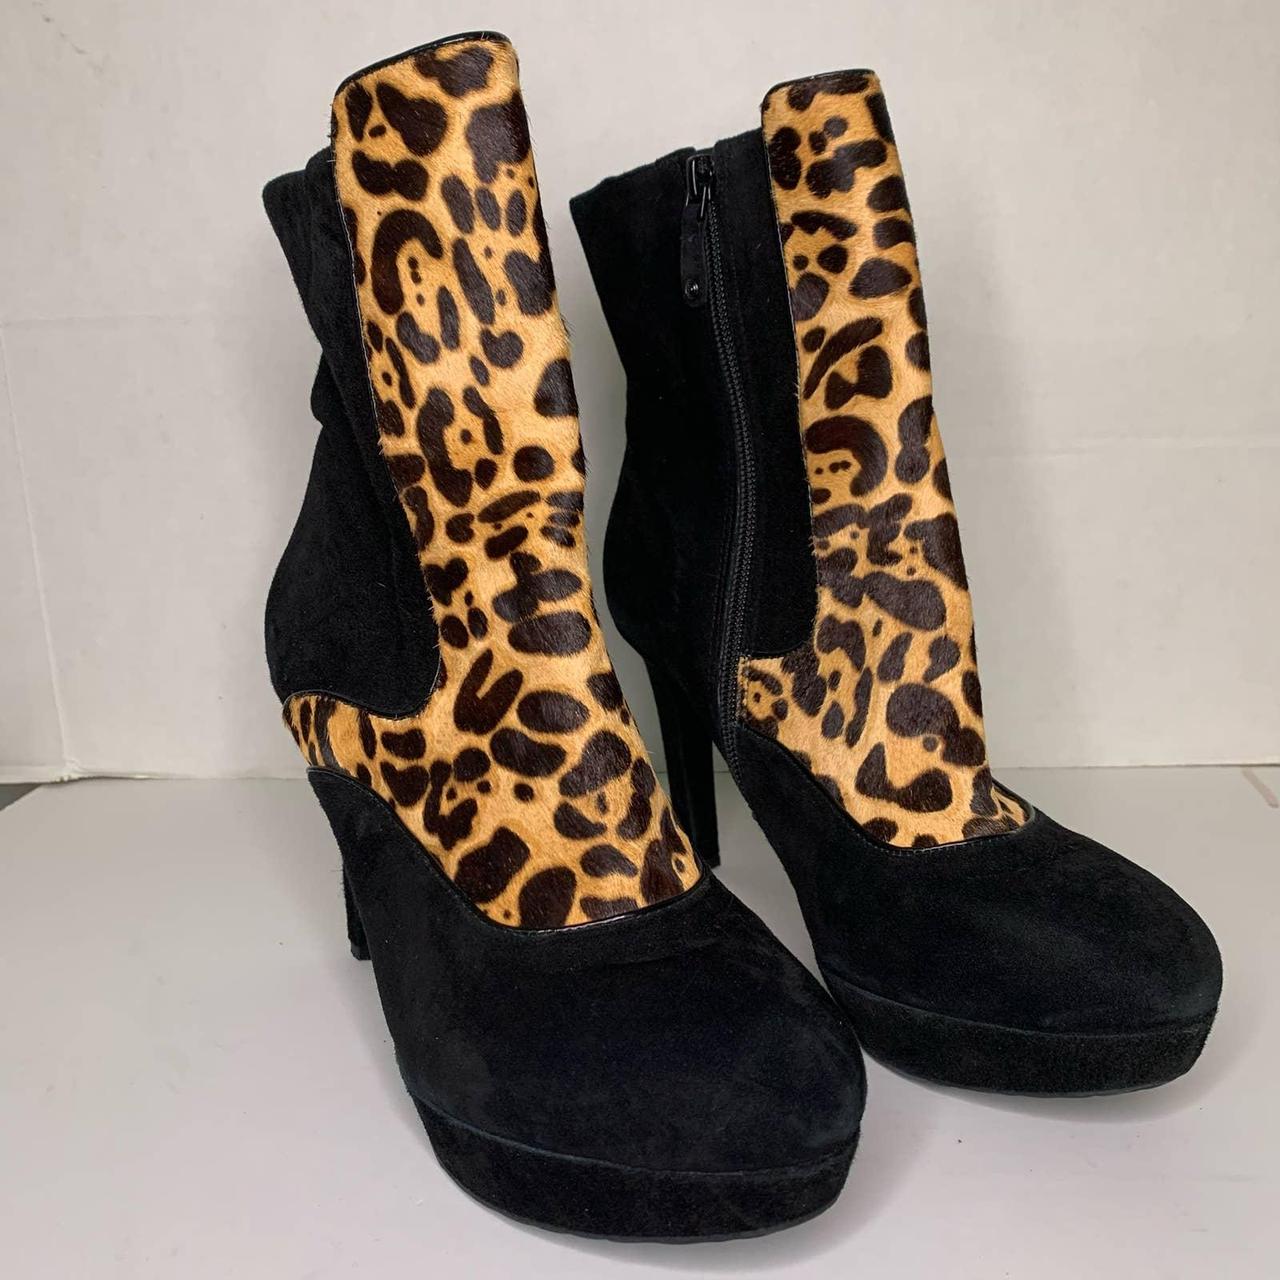 Rockport Women's Black and Tan Boots | Depop